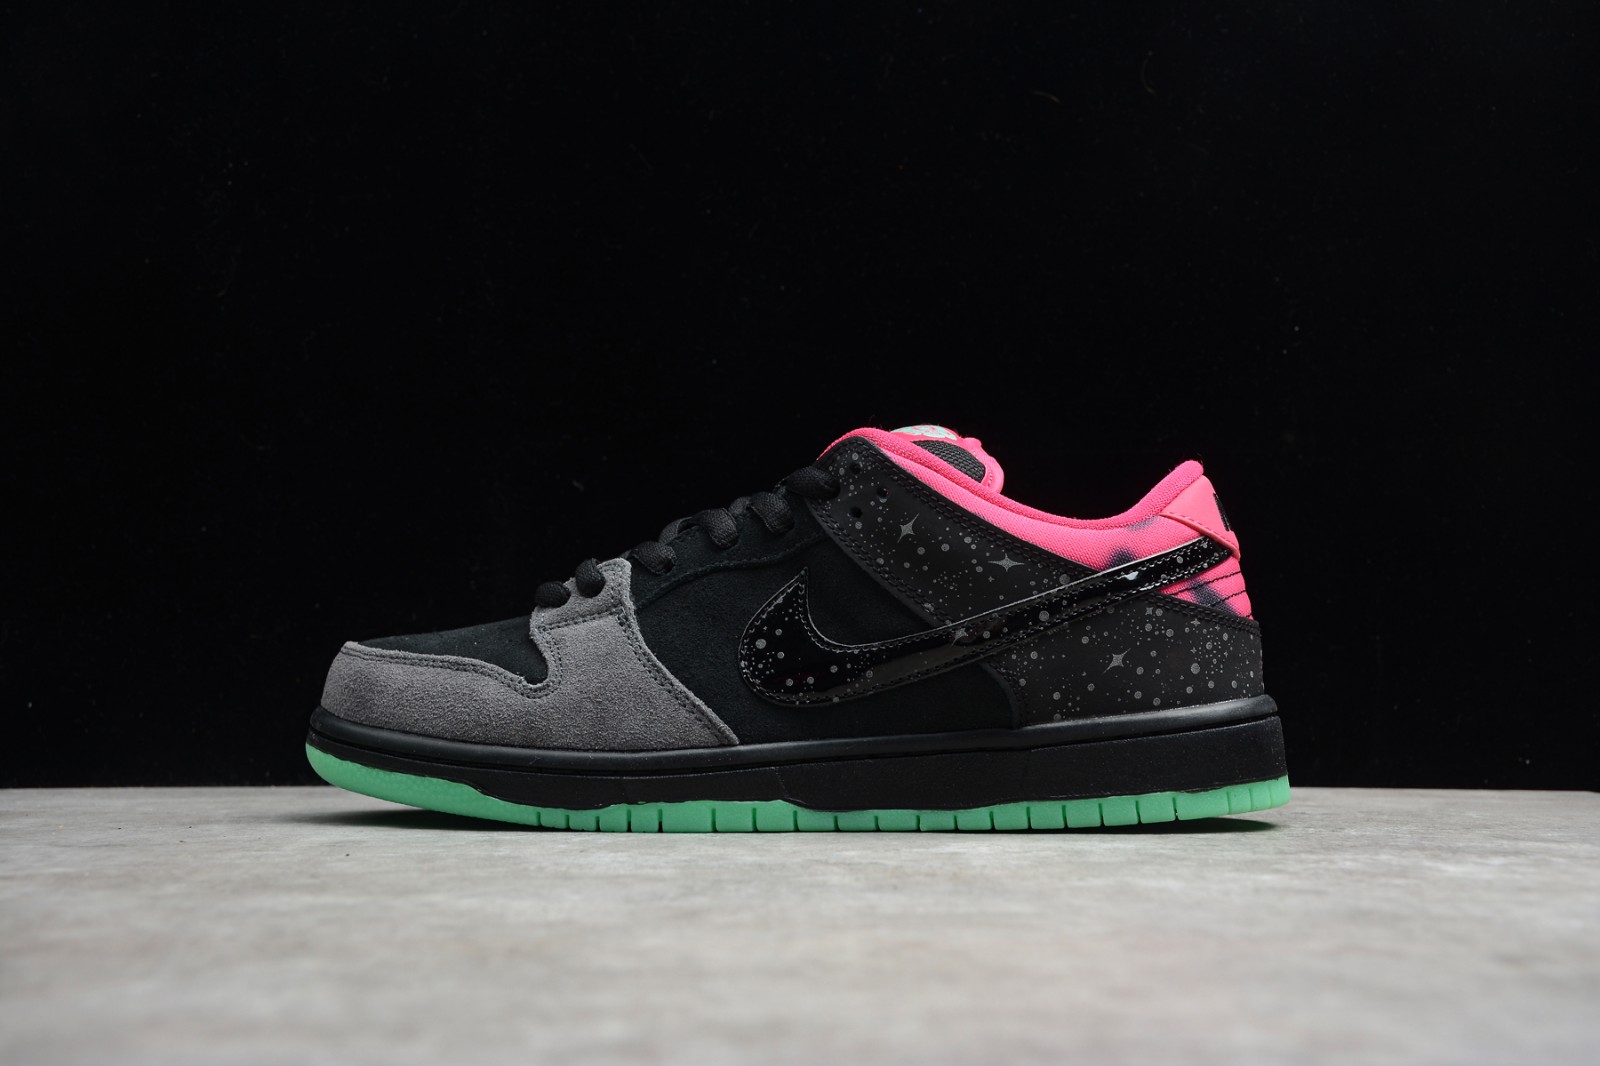 Sepsale - for Sale - nike dunks glow the dark for sale california - Nike Dunk swoosh Pro Northern Lights Yeezy Sneakers 313171